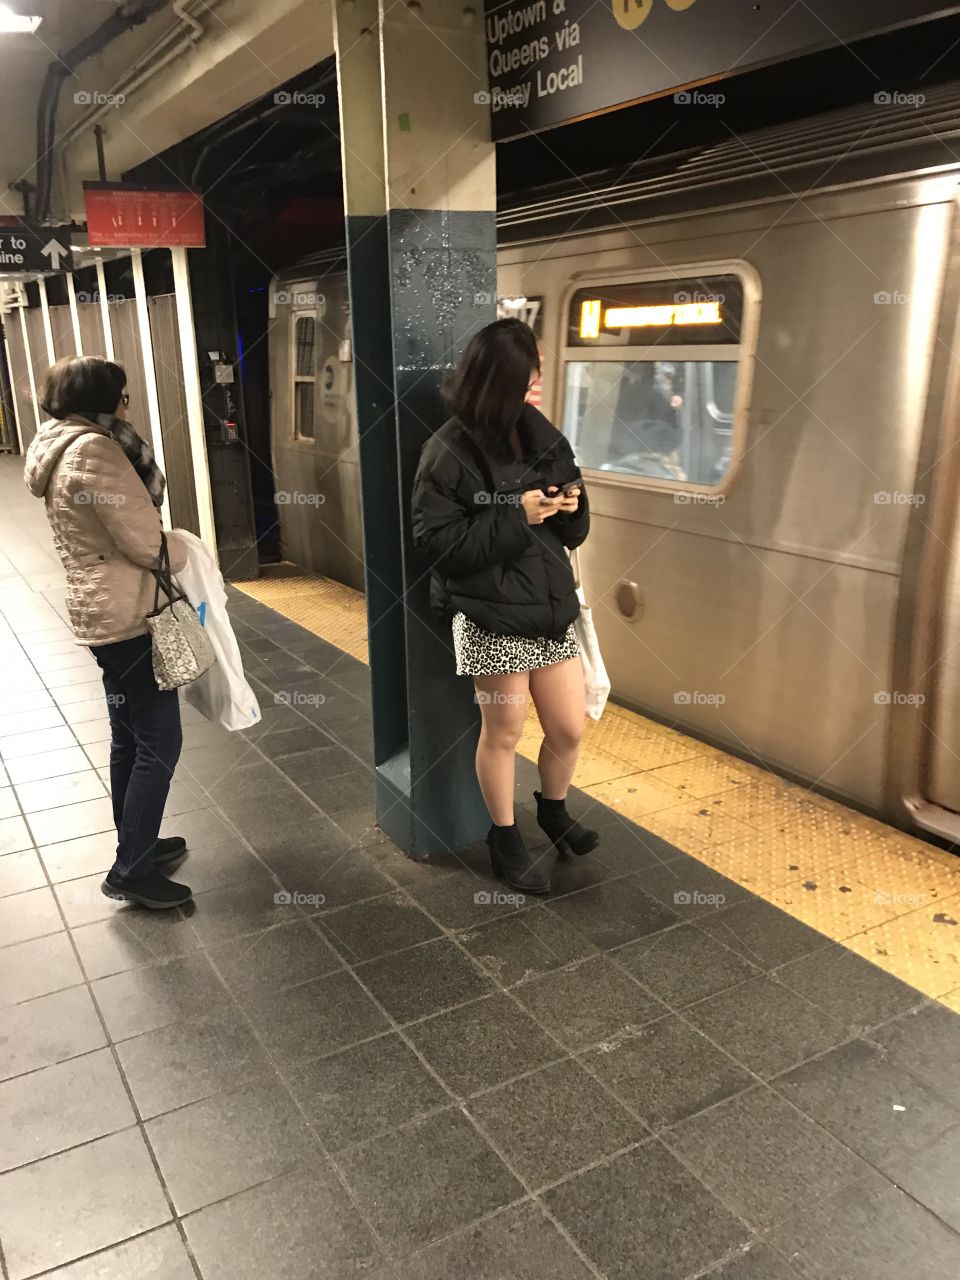 Beautiful girl in a miniskirt waits for the uptown Broadway local at Times Square Station.